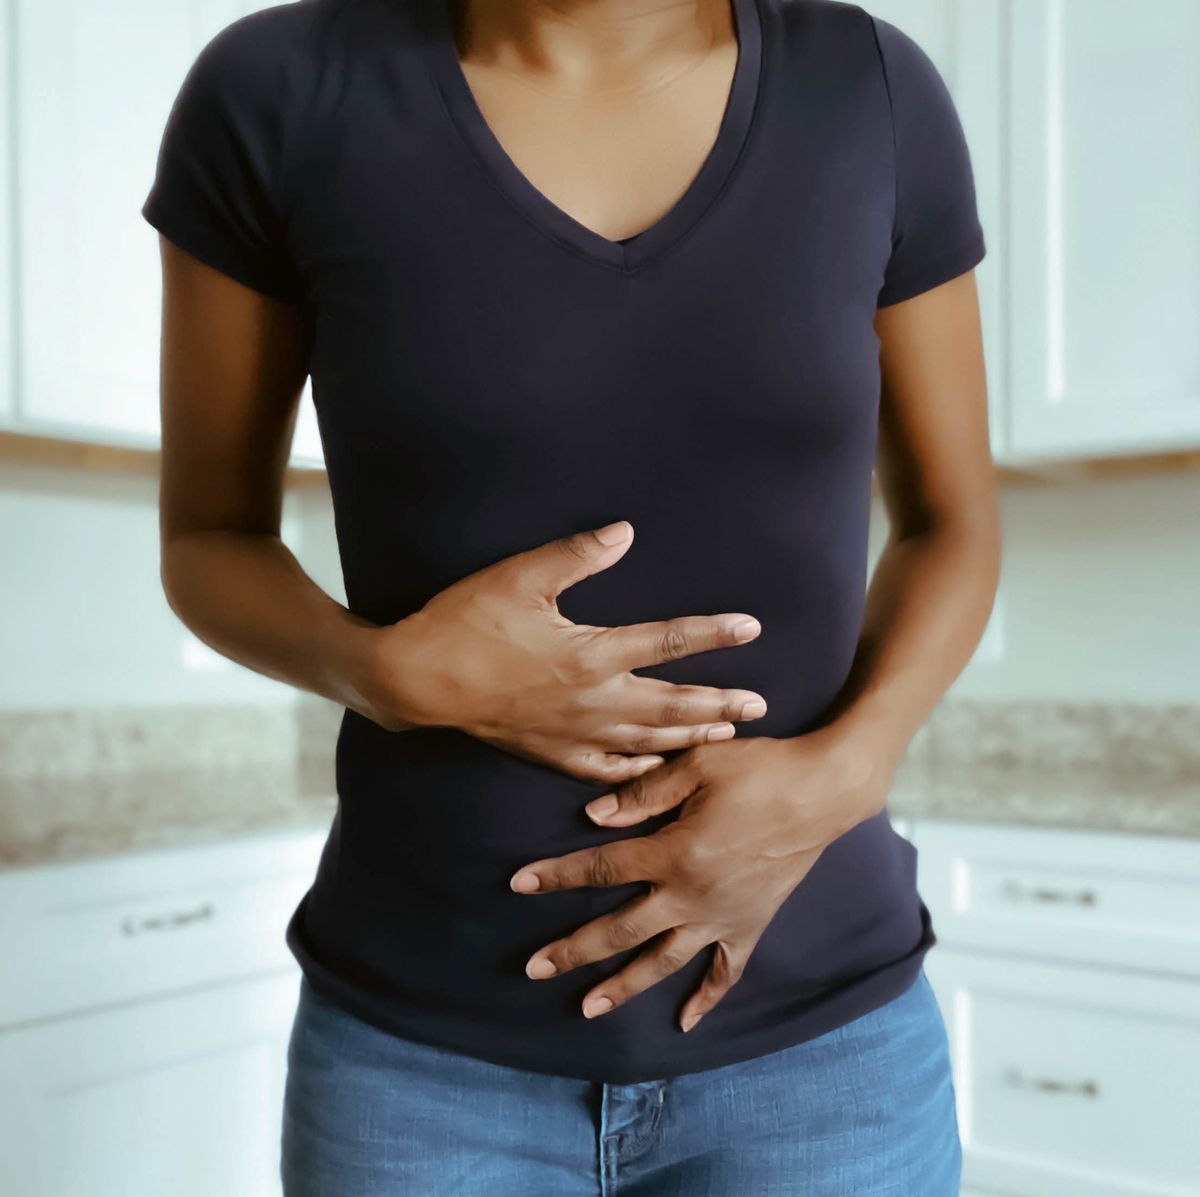 Why Do I Bloat On Or Before My Period? (+ 5 Tips to Stop it!)